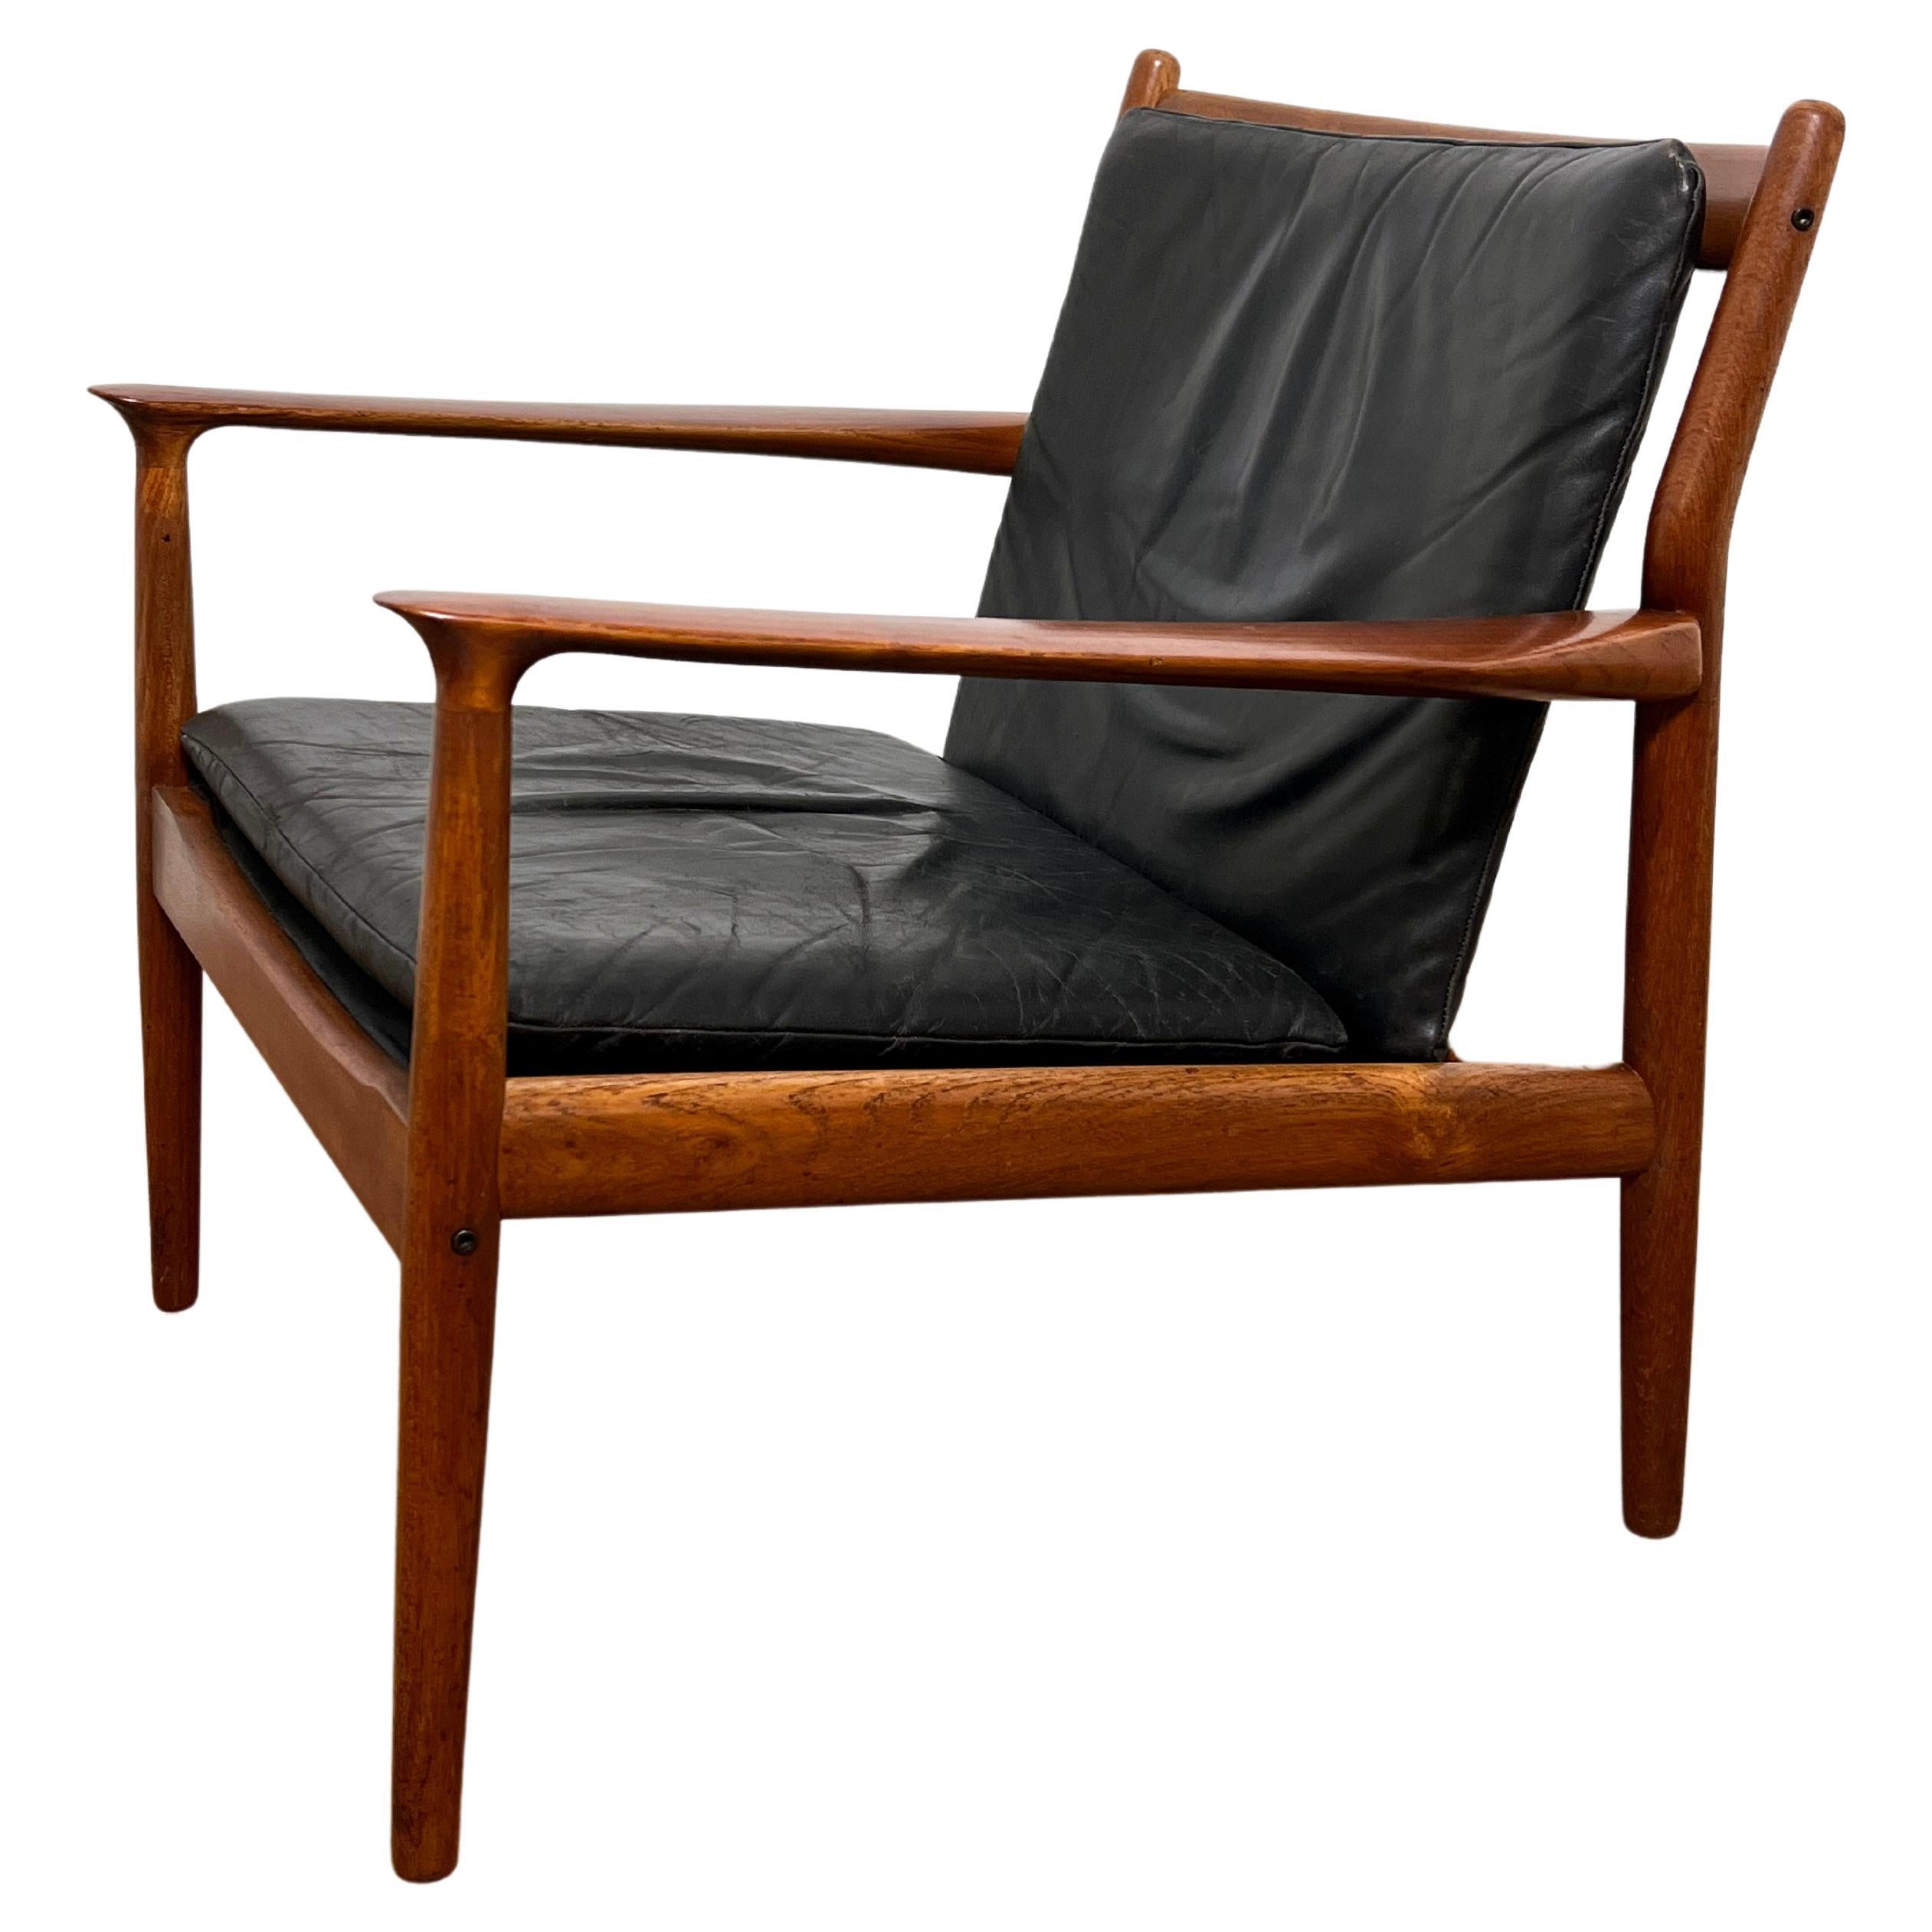 Svend Aage Eriksen for Glostrup Danish Teak and Leather Lounge Chair Circa 1960s For Sale